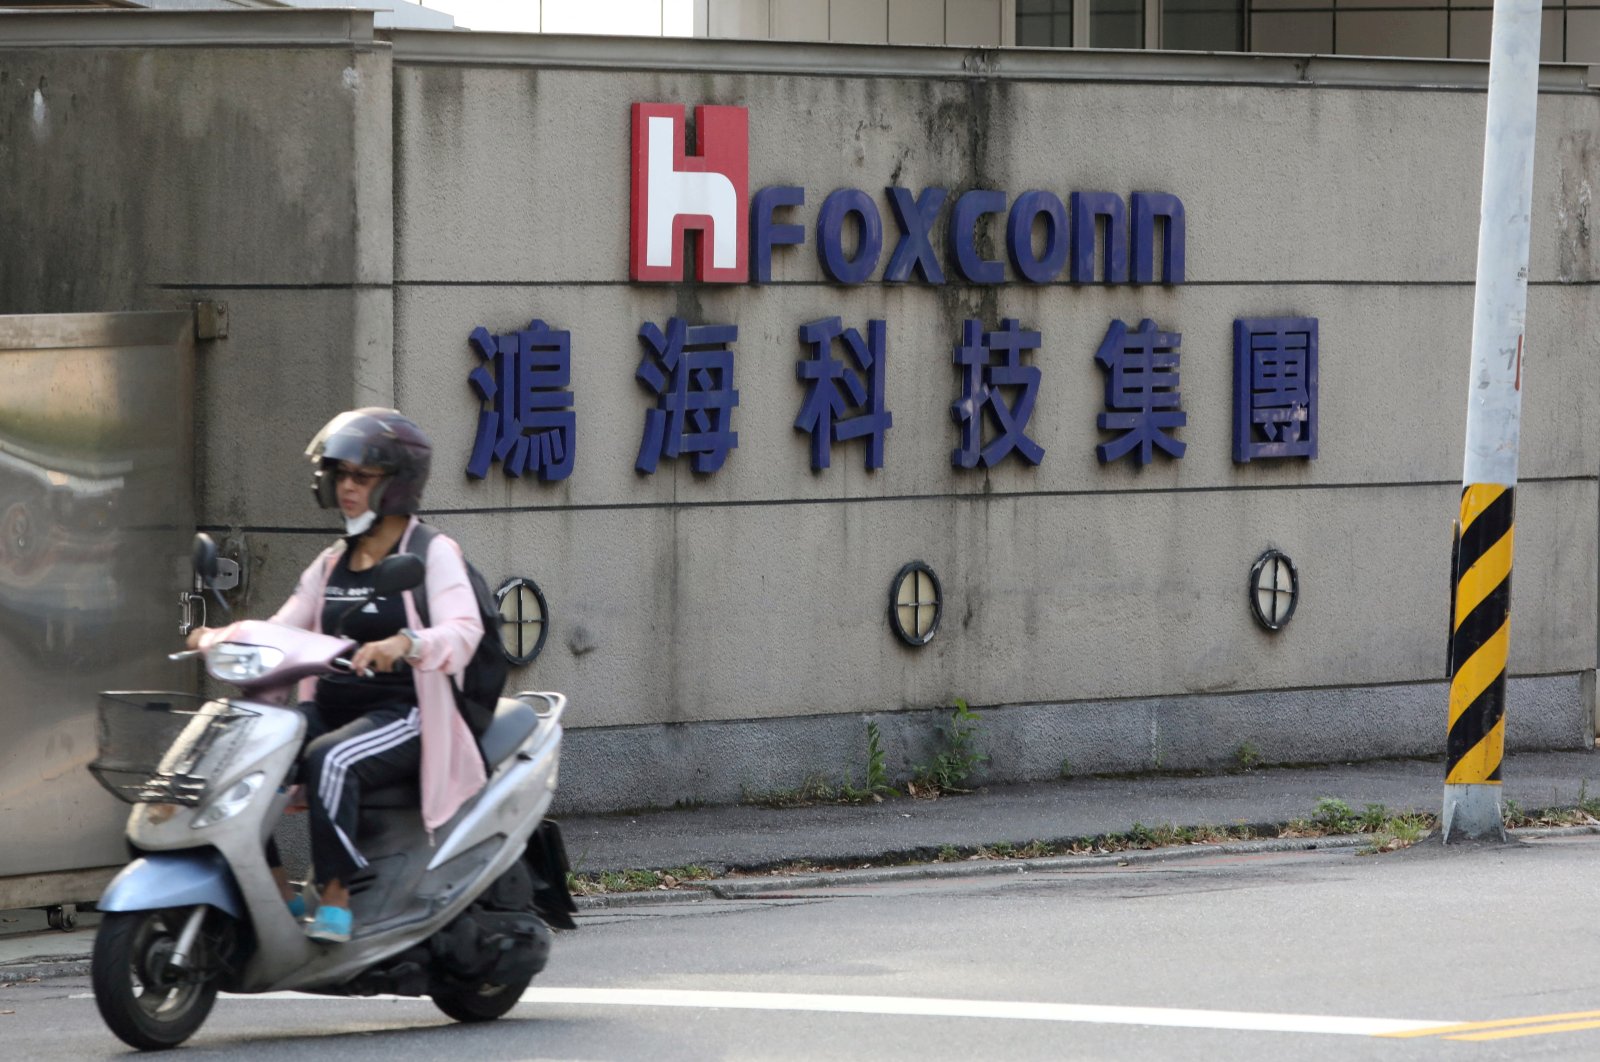 A motorist passes by a Foxconn office building in Taipei, Taiwan, July 14, 2020. (Reuters Photo)